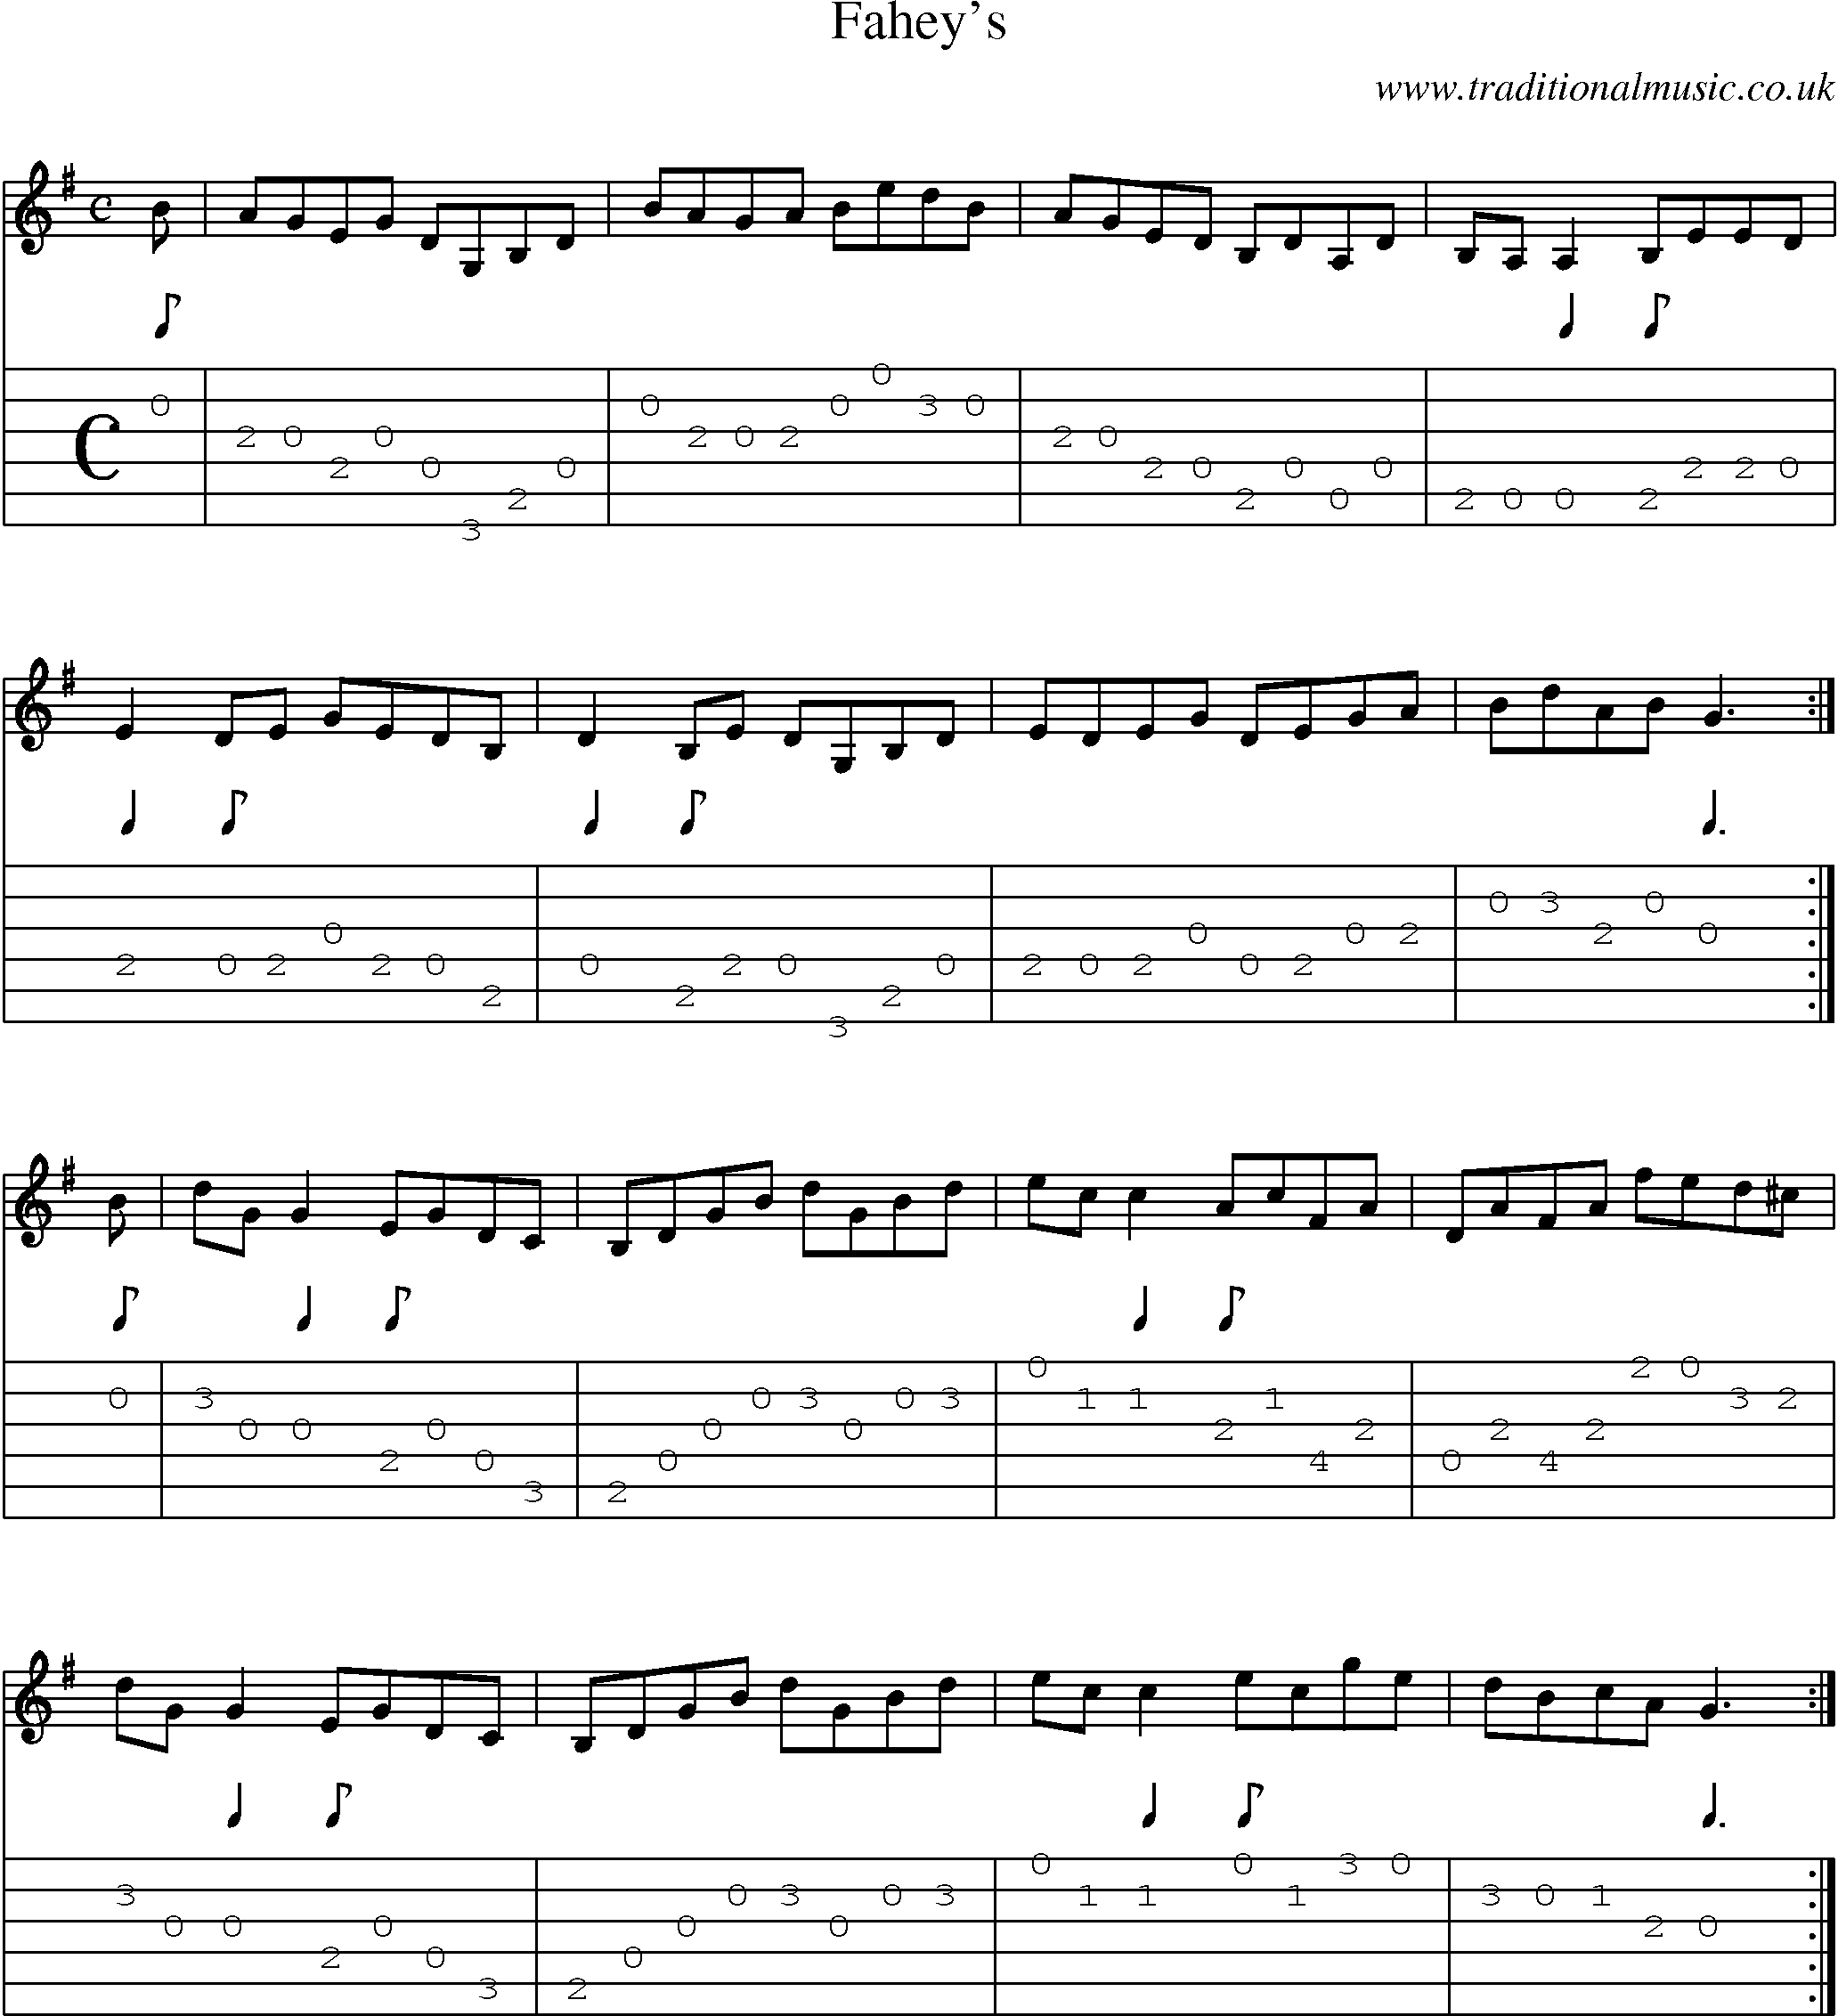 Music Score and Guitar Tabs for Faheys